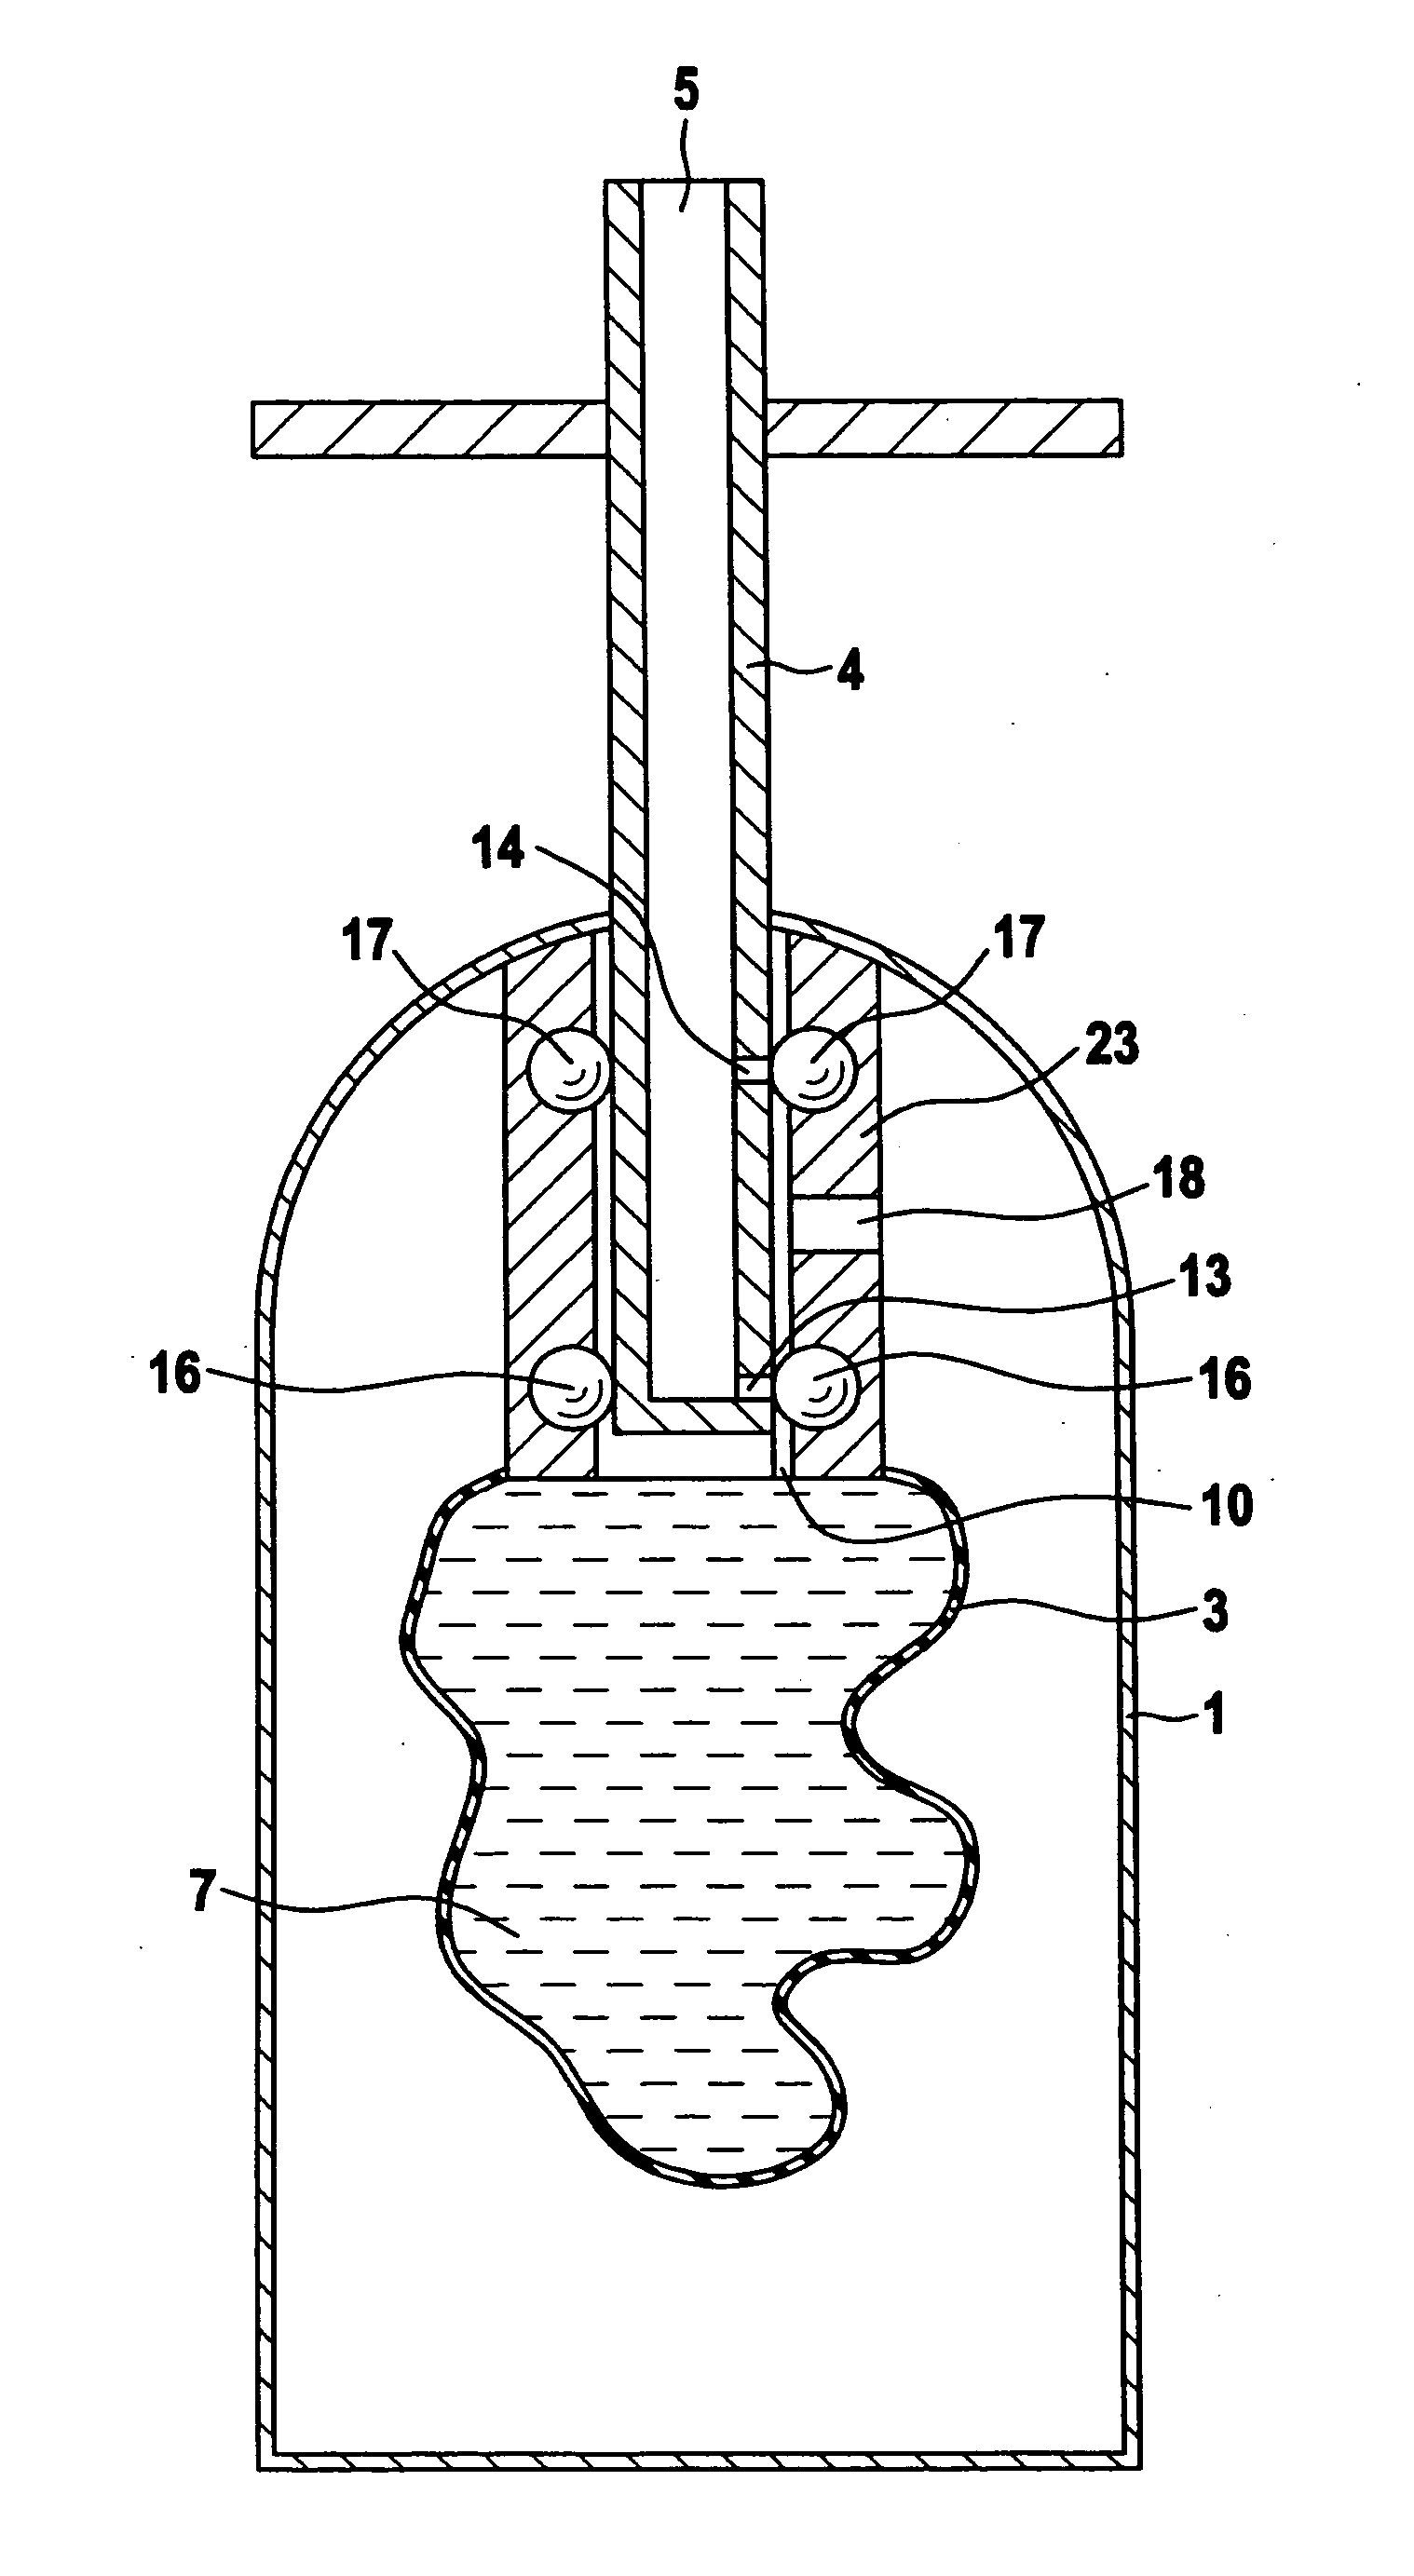 Apparatus for dispensing an atomized liquid product